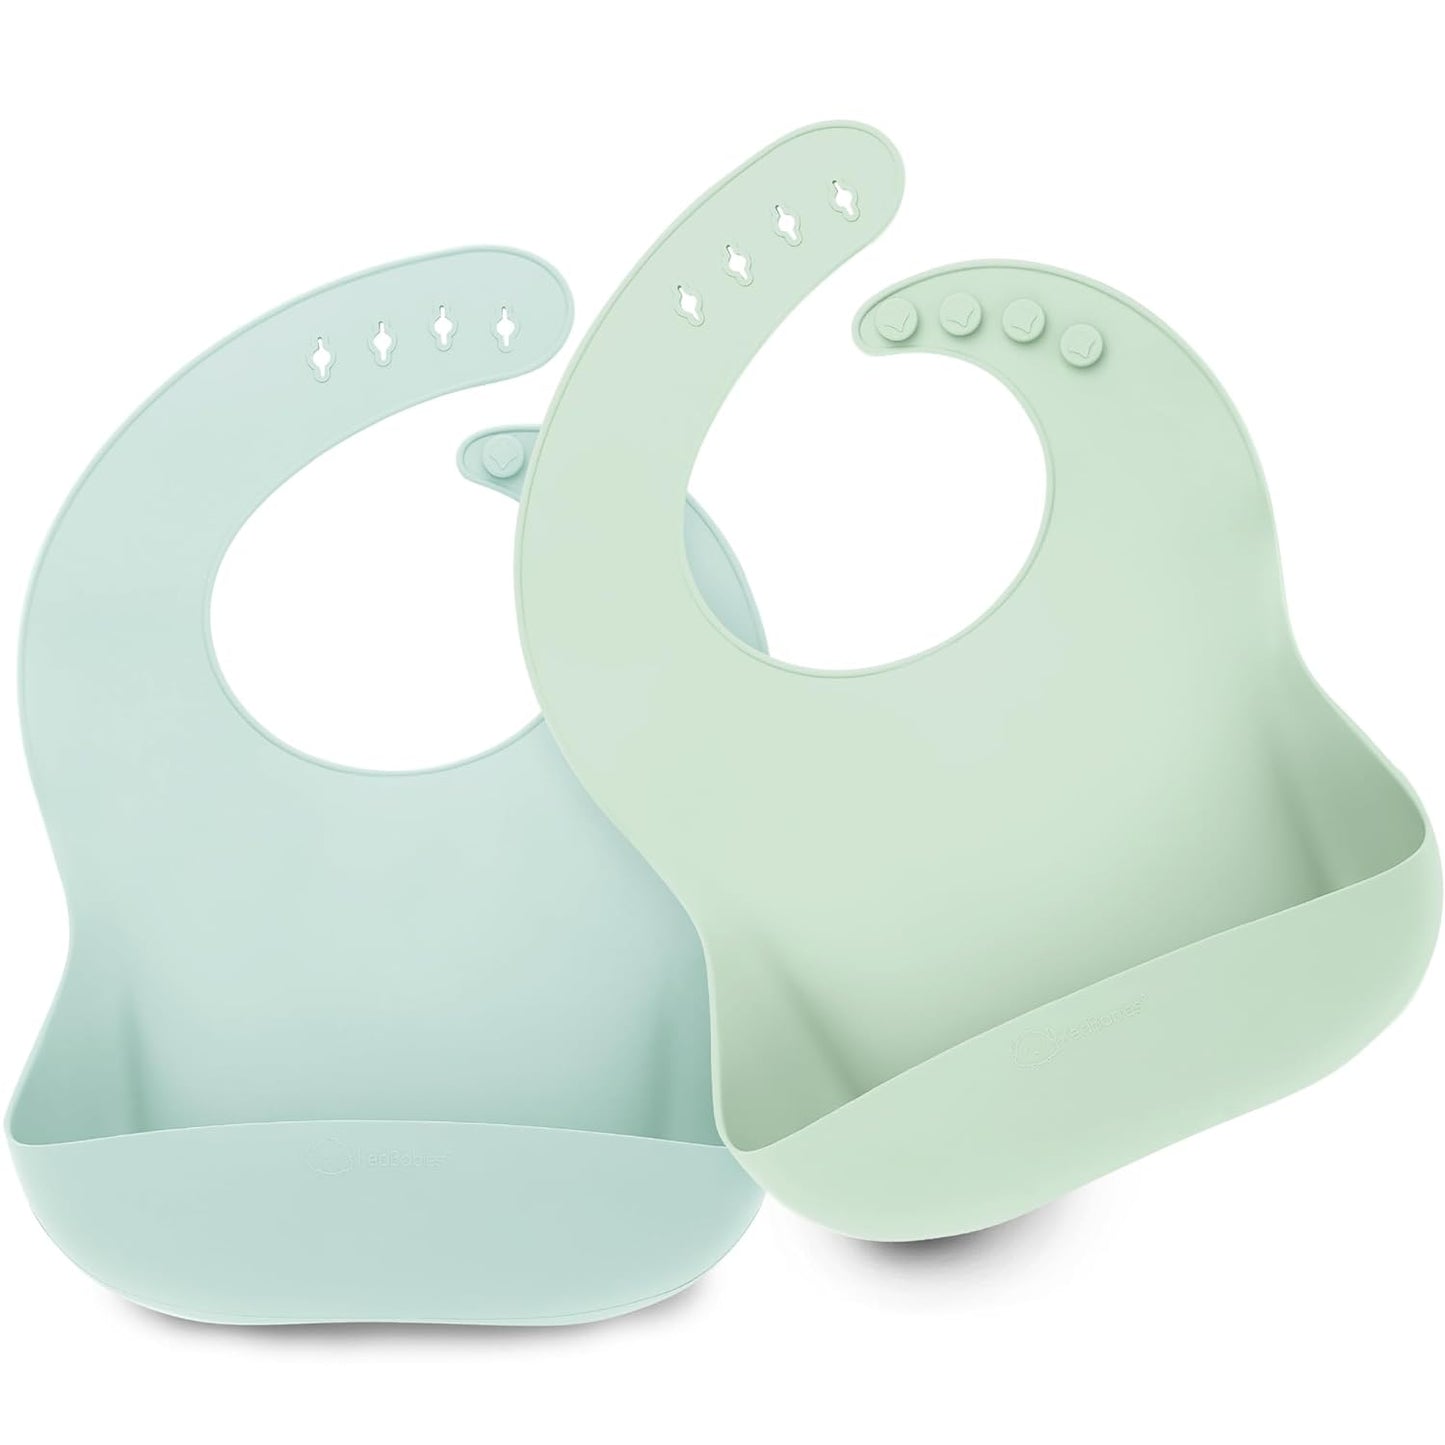 KeaBabies 2-Pack Silicone Bibs For Babies, Silicone Baby Bibs for Eating, Food-Grade Pure Silicone Bib, Toddler Bibs, Waterproof Bibs, Feeding Bibs, Silicon Bibs for Toddlers, Boys, Girls (Dusk)